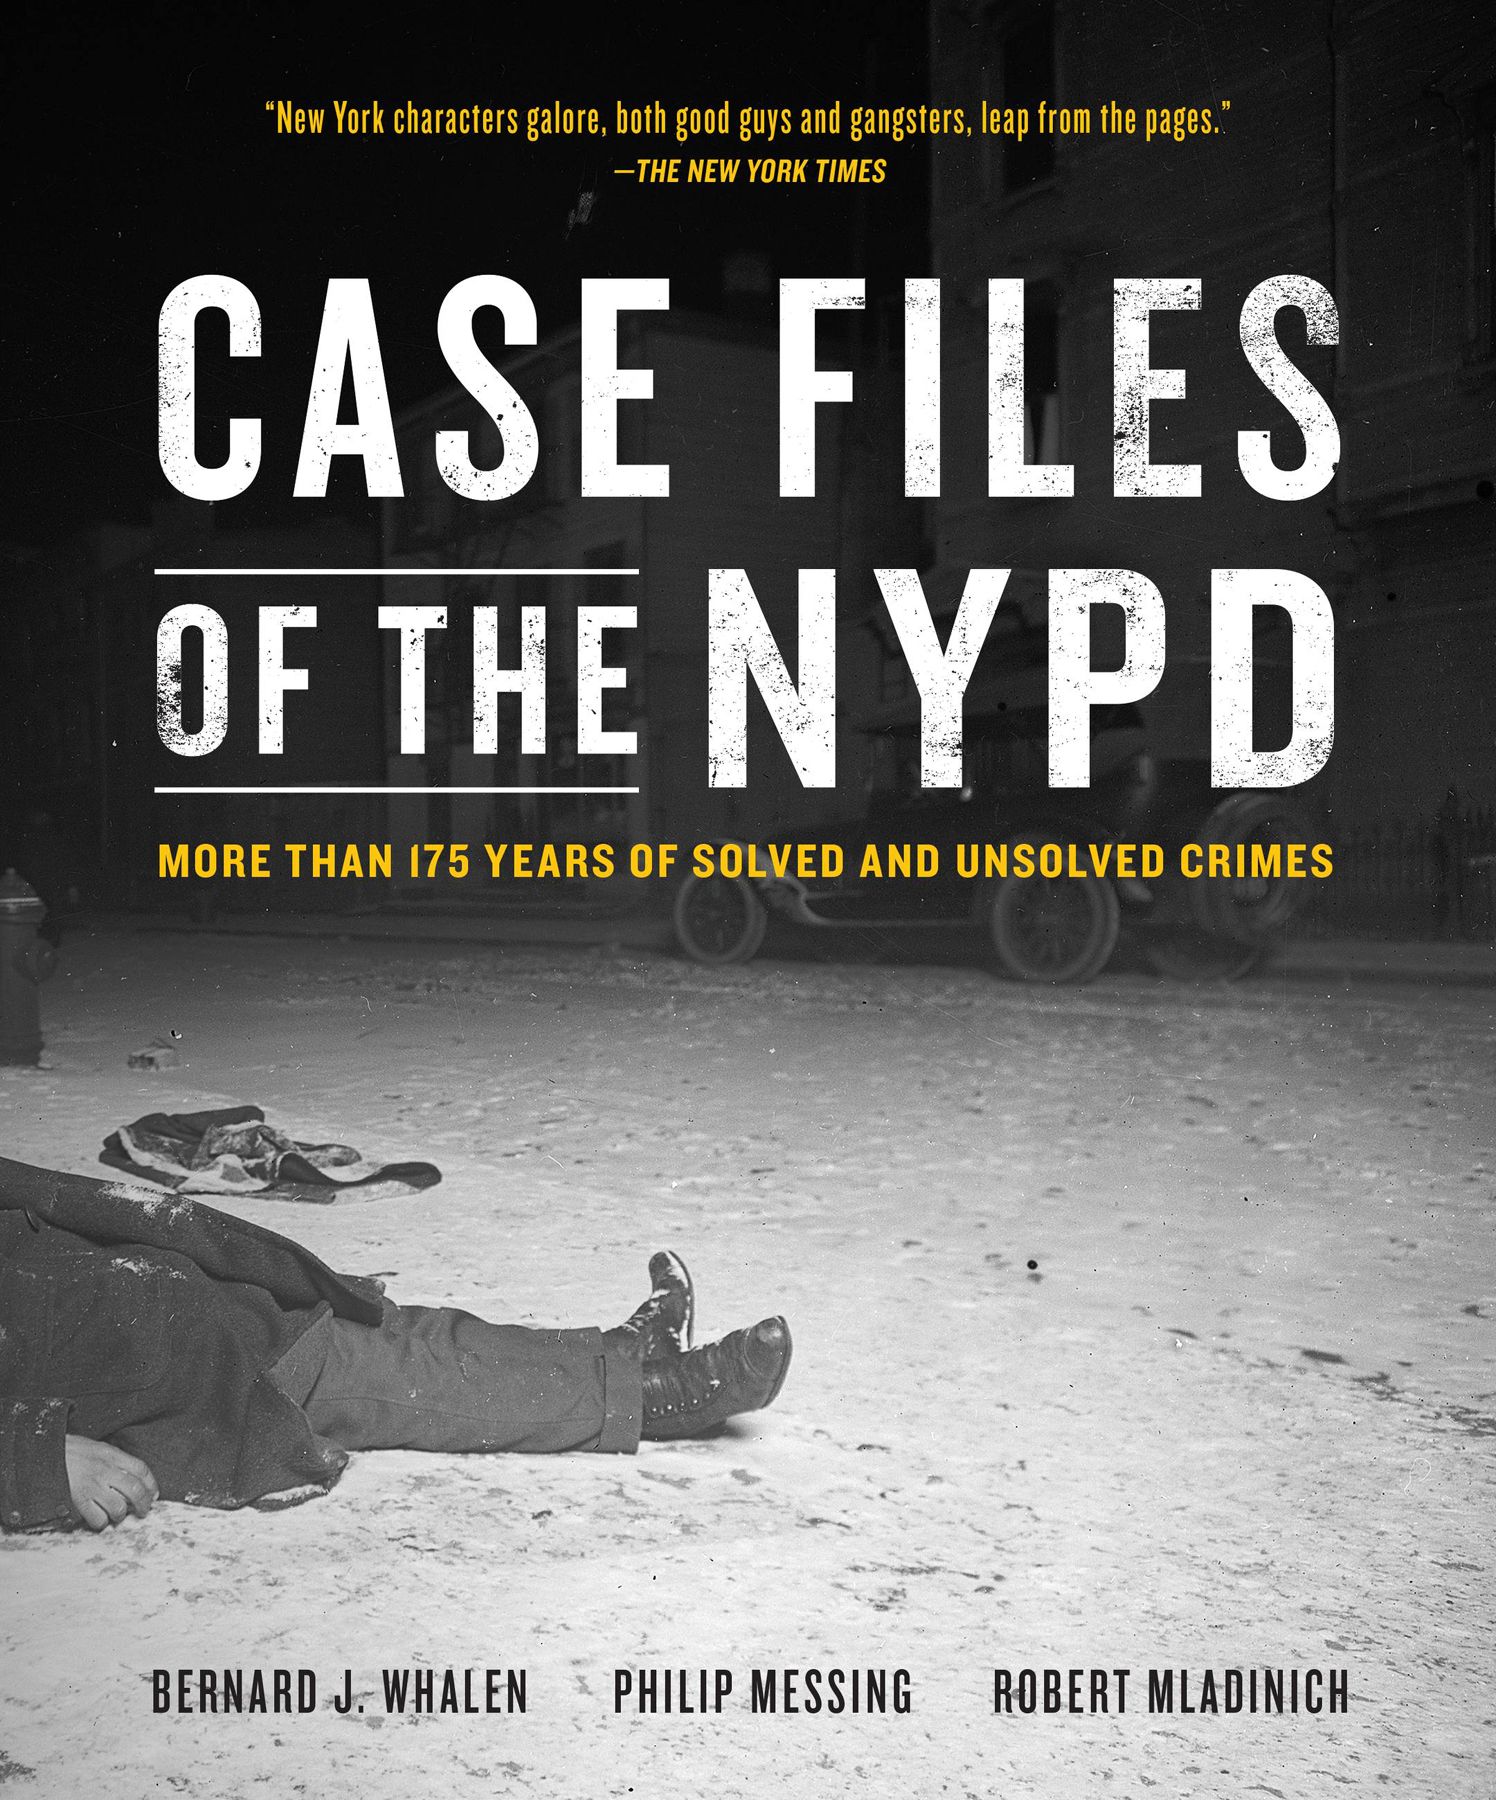 Case-Files-of-the-NYPD-More-than-175-Years-of-Solved-and-Unsolved-Crimes